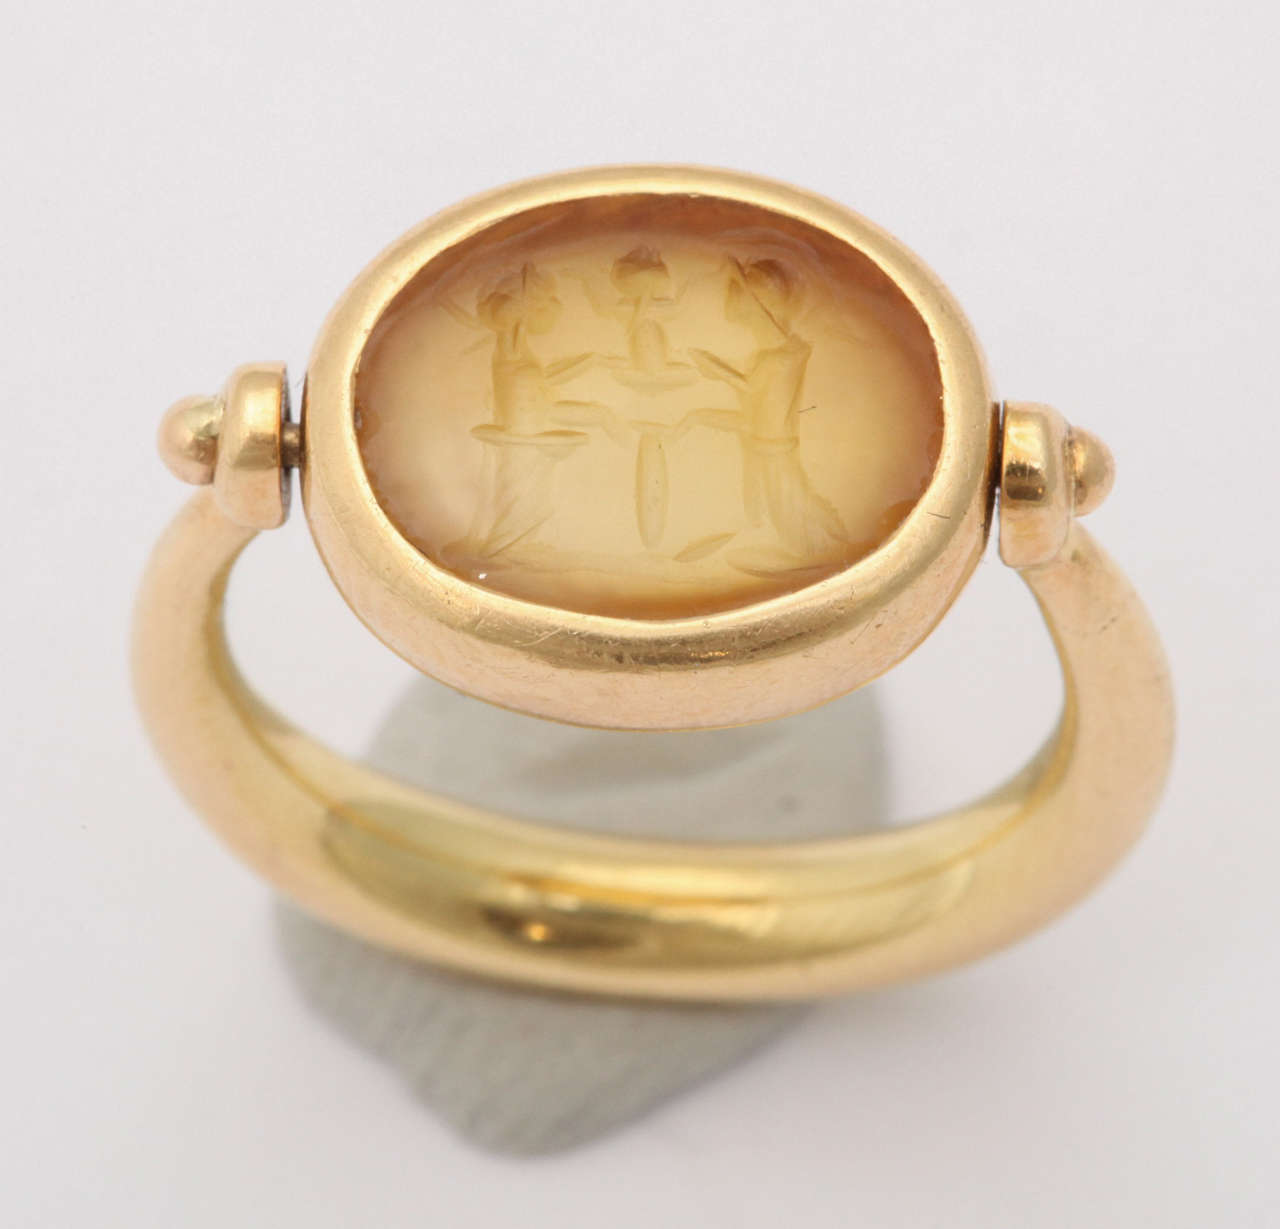 Splendid Pinky  Ring set in Oval 18kt Yellow Gold swivel mounting. Lovely Intaglio of two opposing Gods & a central Figure.
Inscribed Roma  2 sec d C & 750 & control numbers.